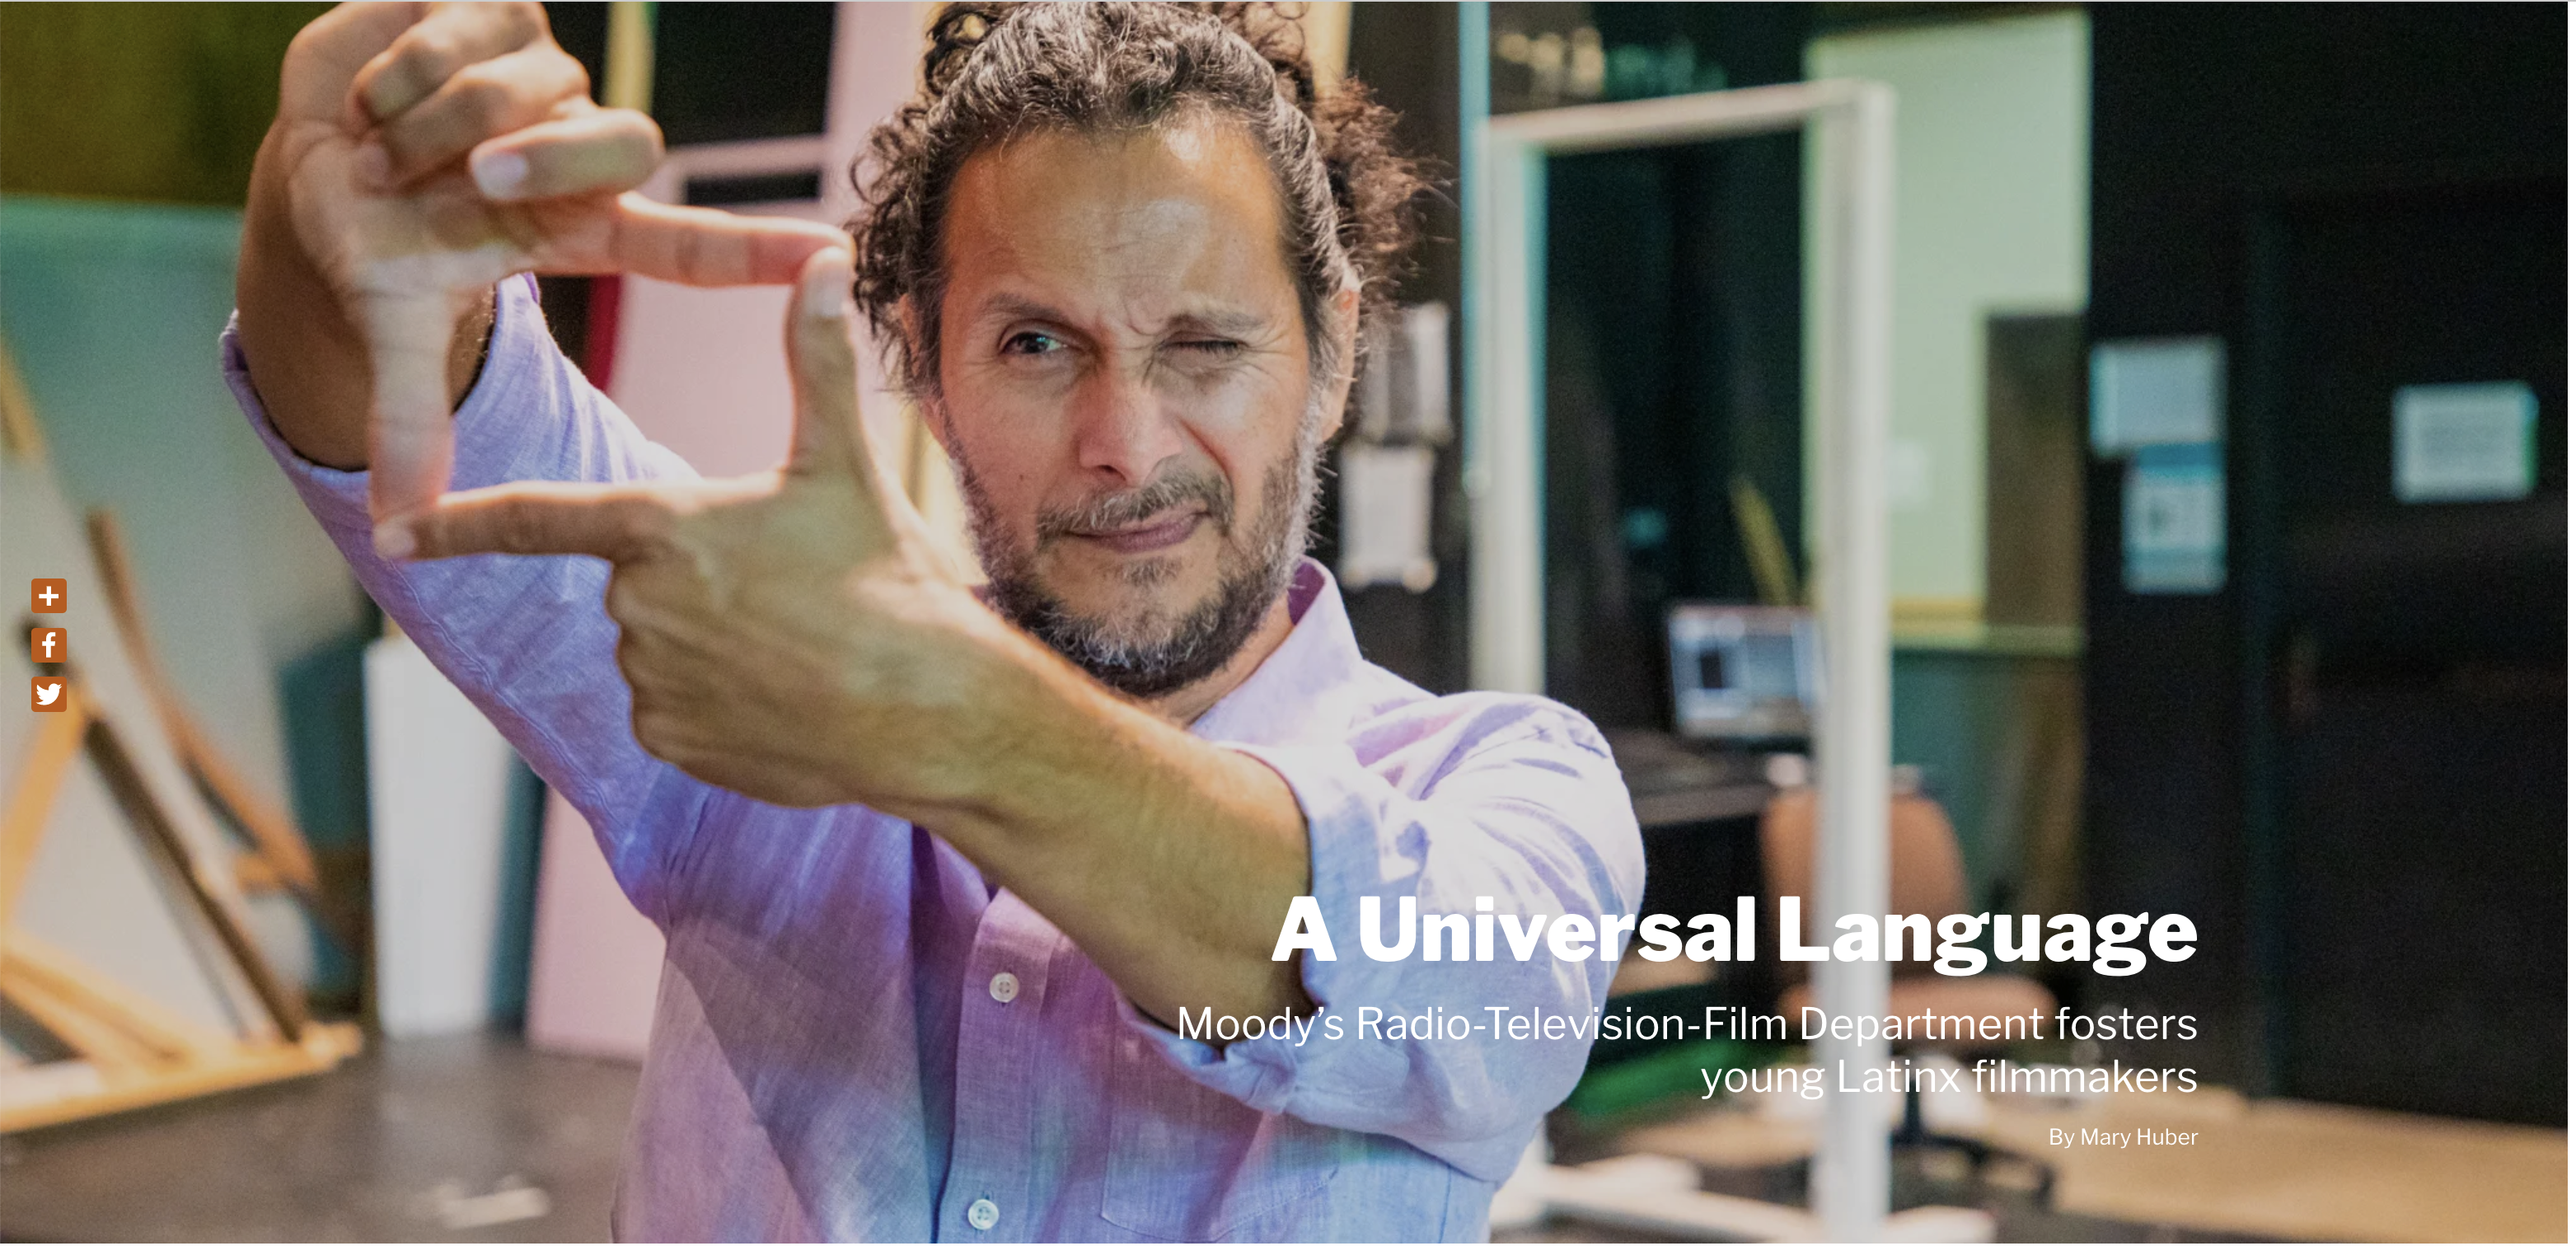 Miguel Alvarez_Latino RTF story  A Universal Language  Moody’s Radio-Television-Film Department fosters young Latinx filmmakers  By Mary Huber